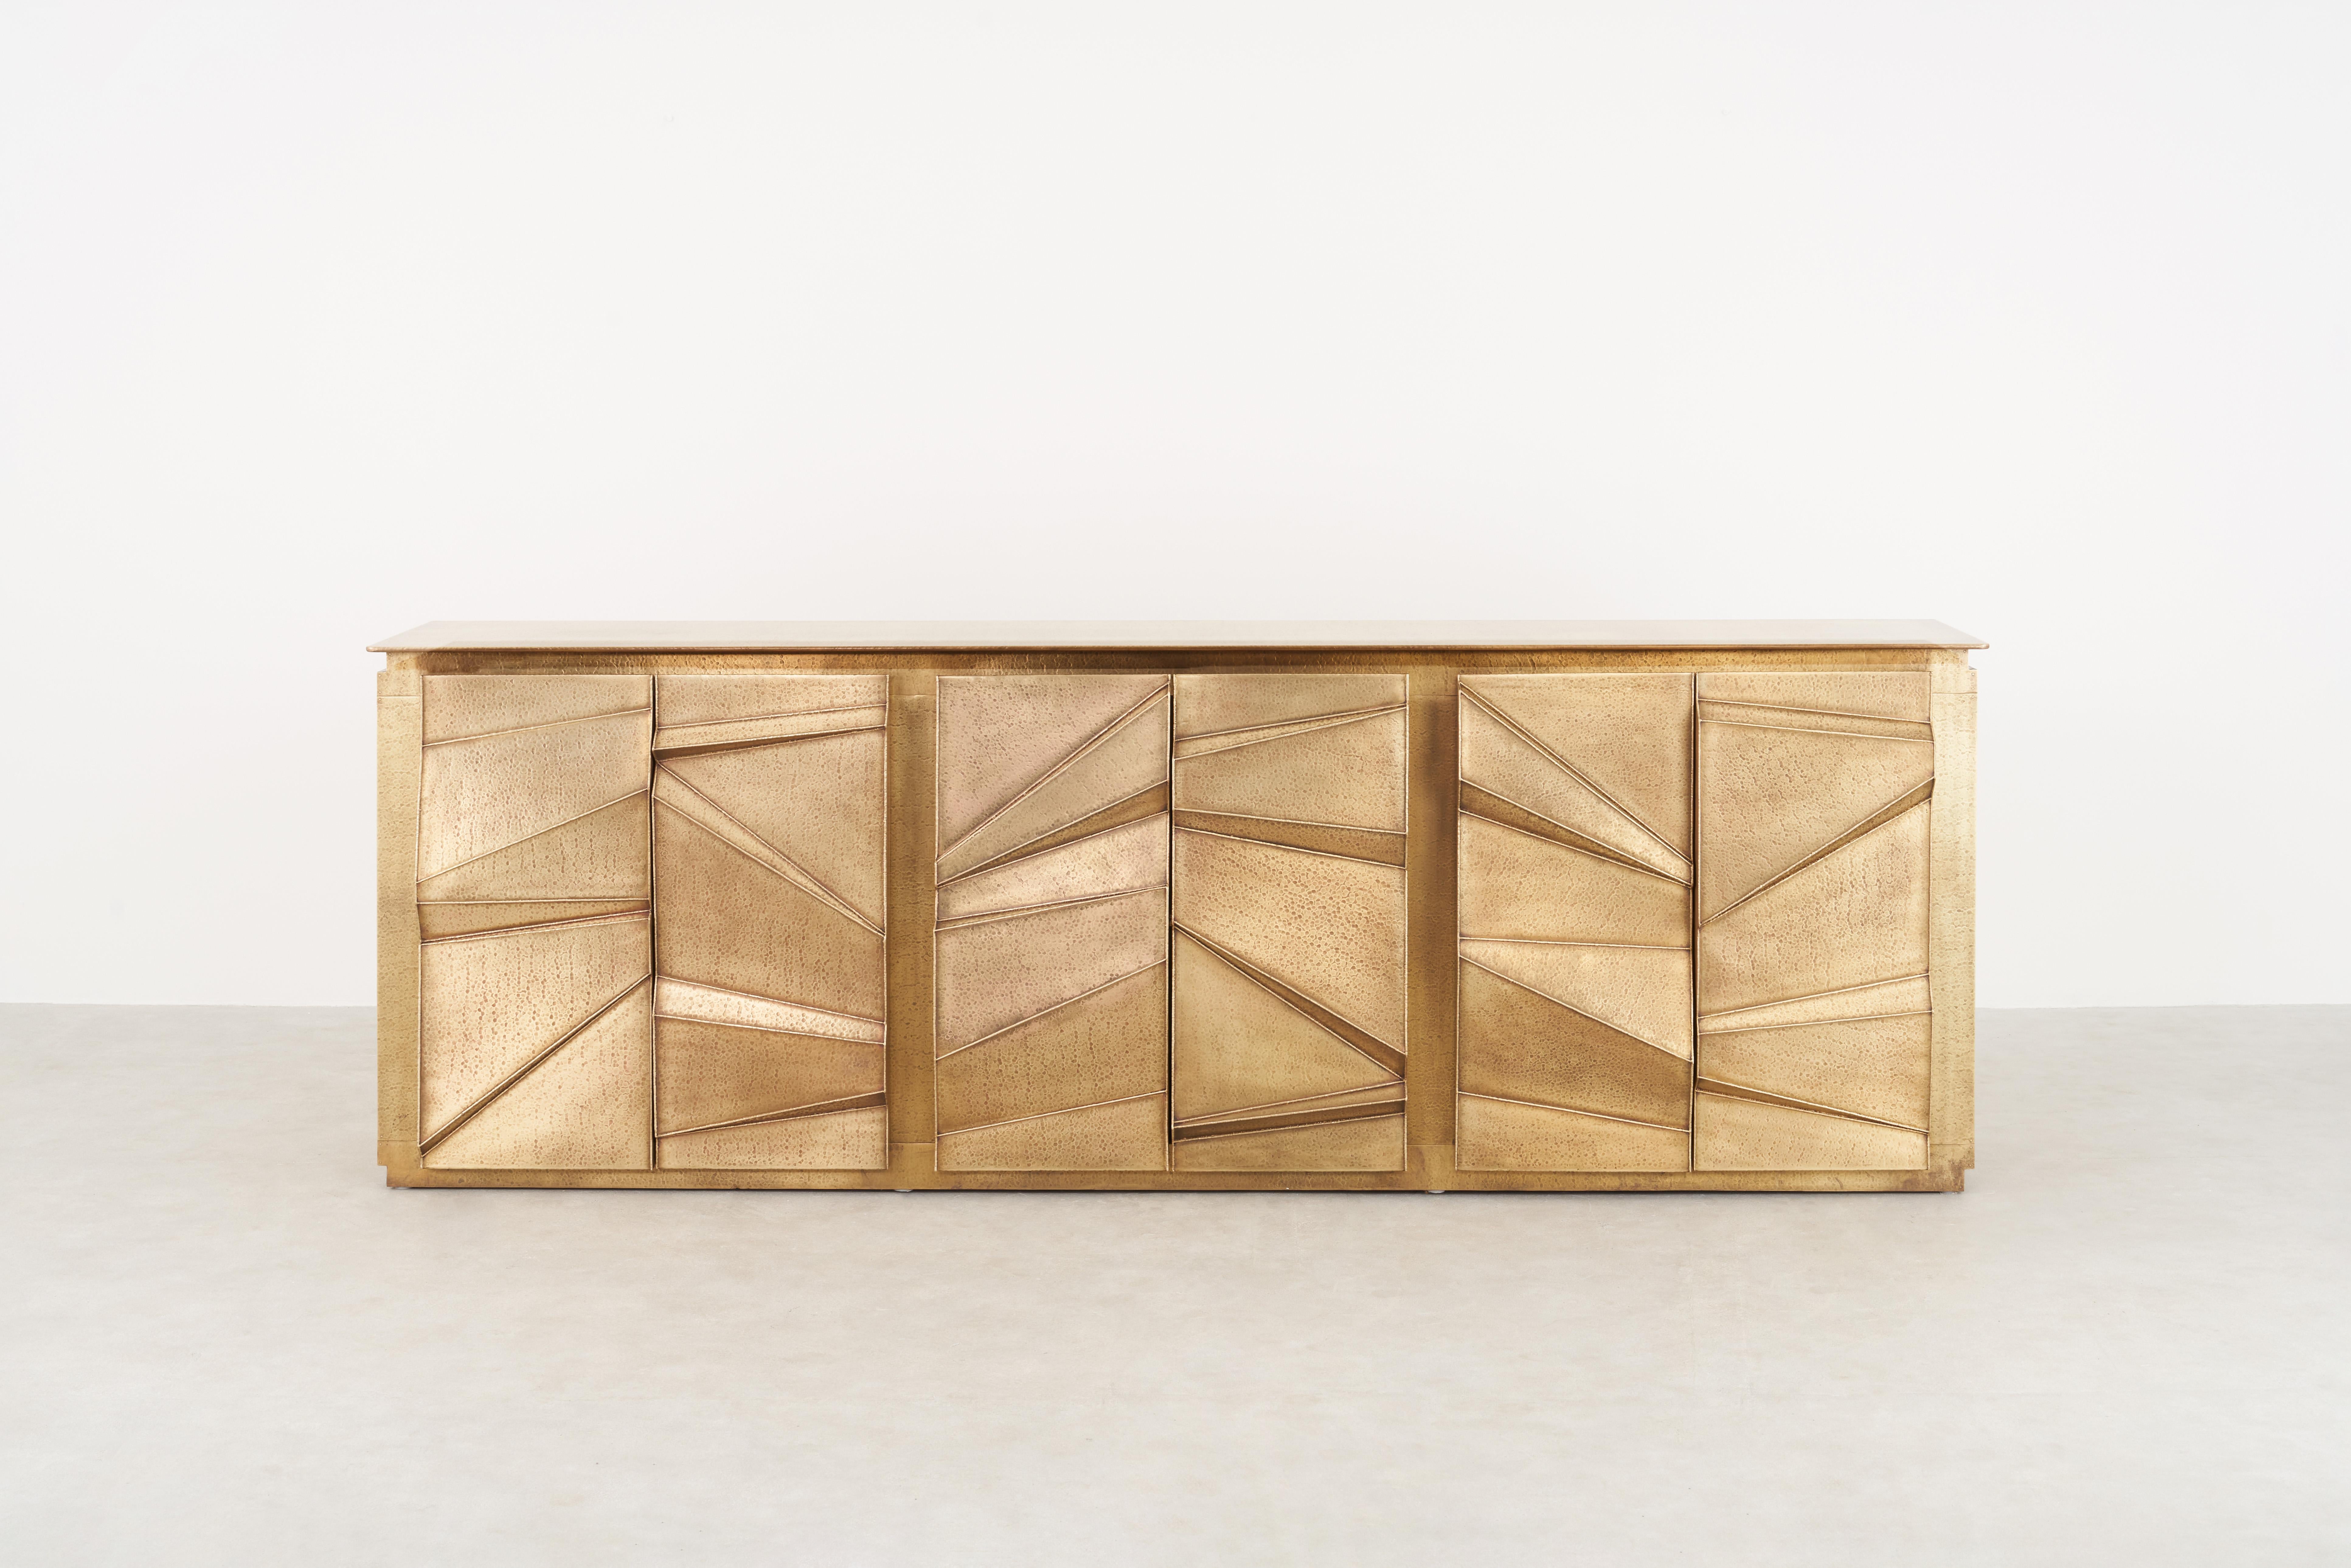 The facade of this sculptural cabinet is crafted using the studio’s signature Hollowed Joinery technique–merging materials and processes that feature hammered brass sheet metal, welded together to leave a hollow structure within. The patinated gold